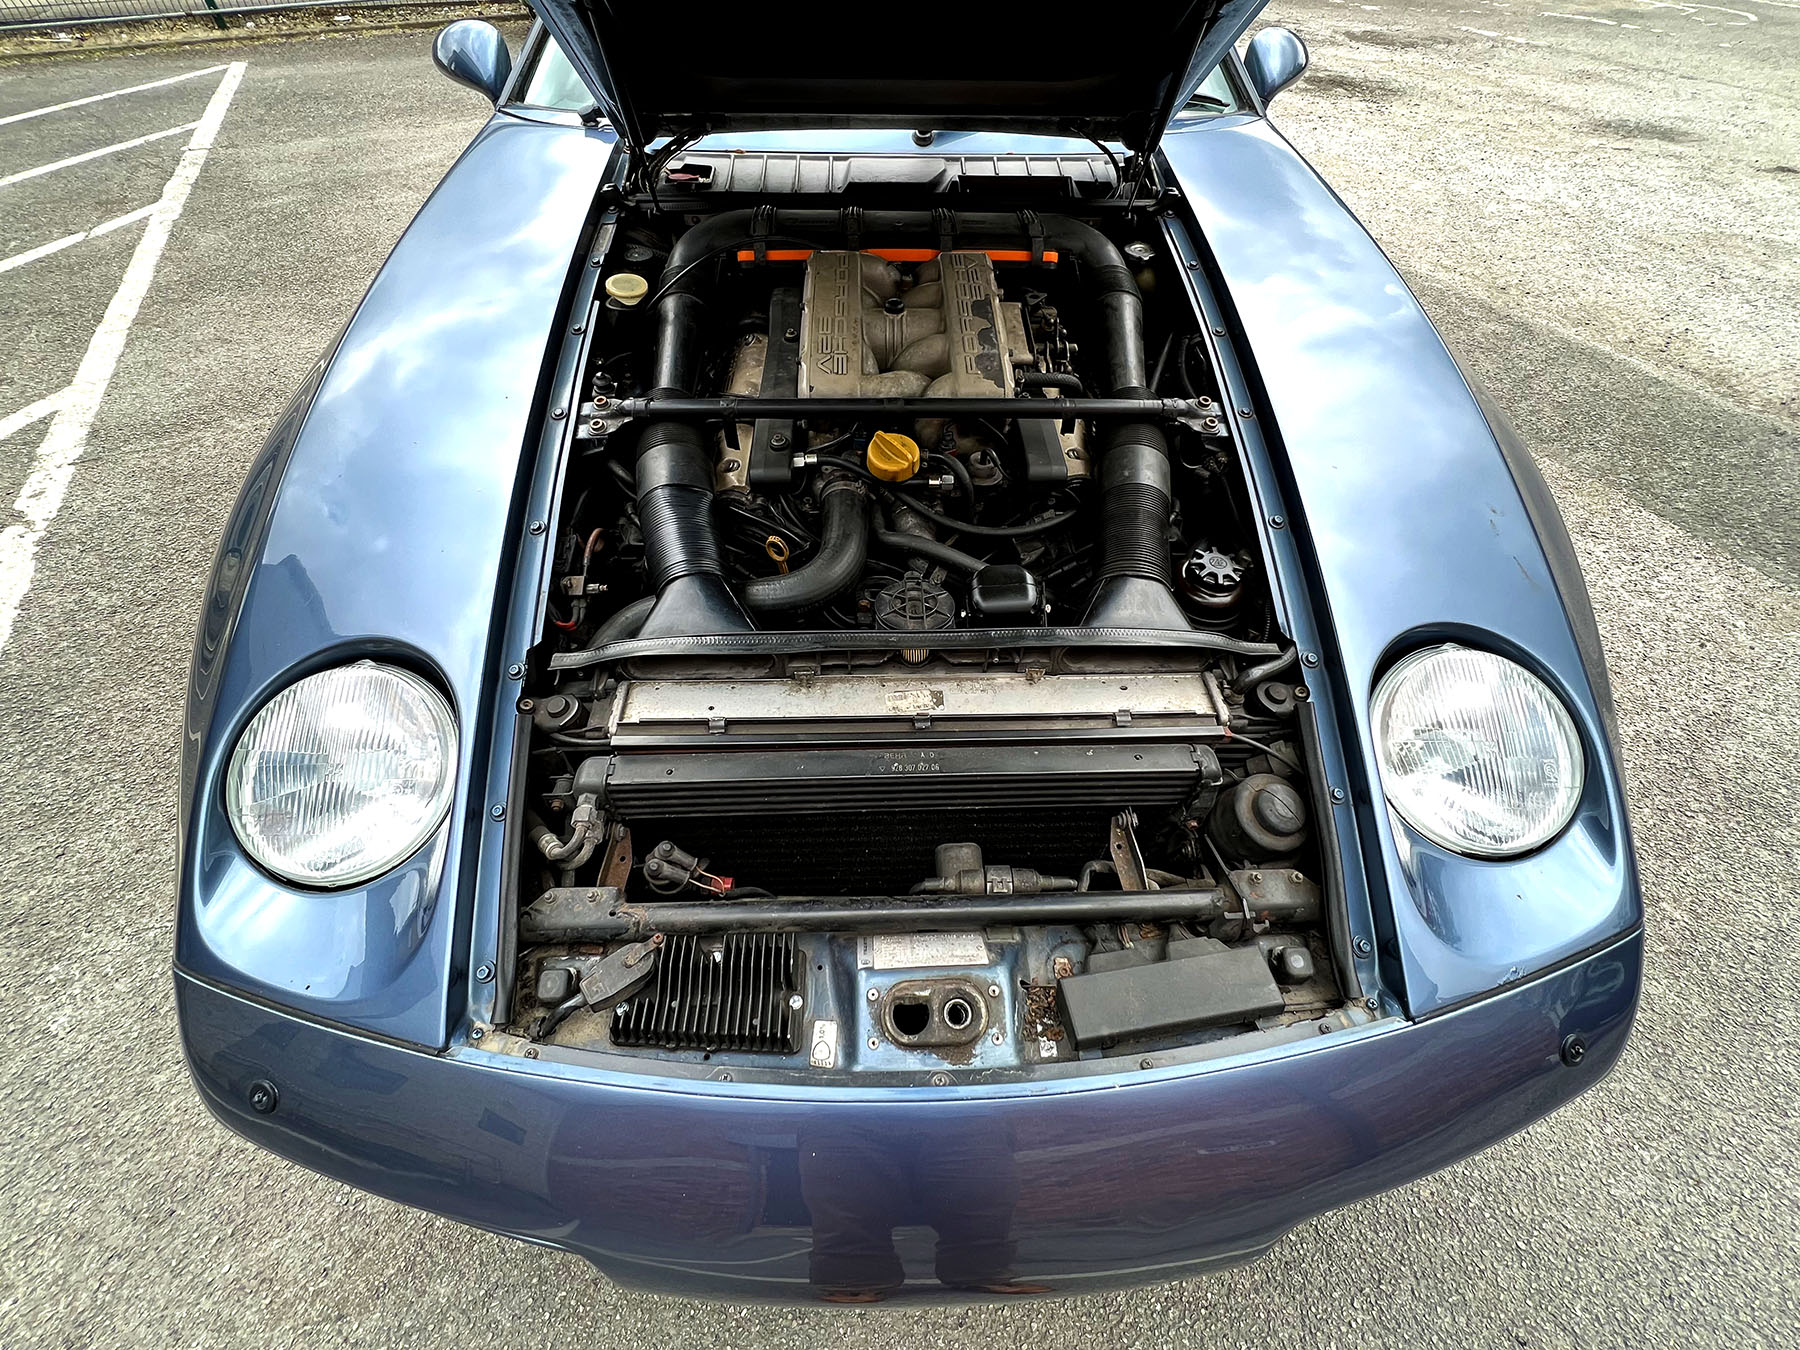 1990 [H754 POC] Porsche 928 S4 in Baltic Blue Metallic with Linen leather interior. 5 litre V8 - Image 7 of 10